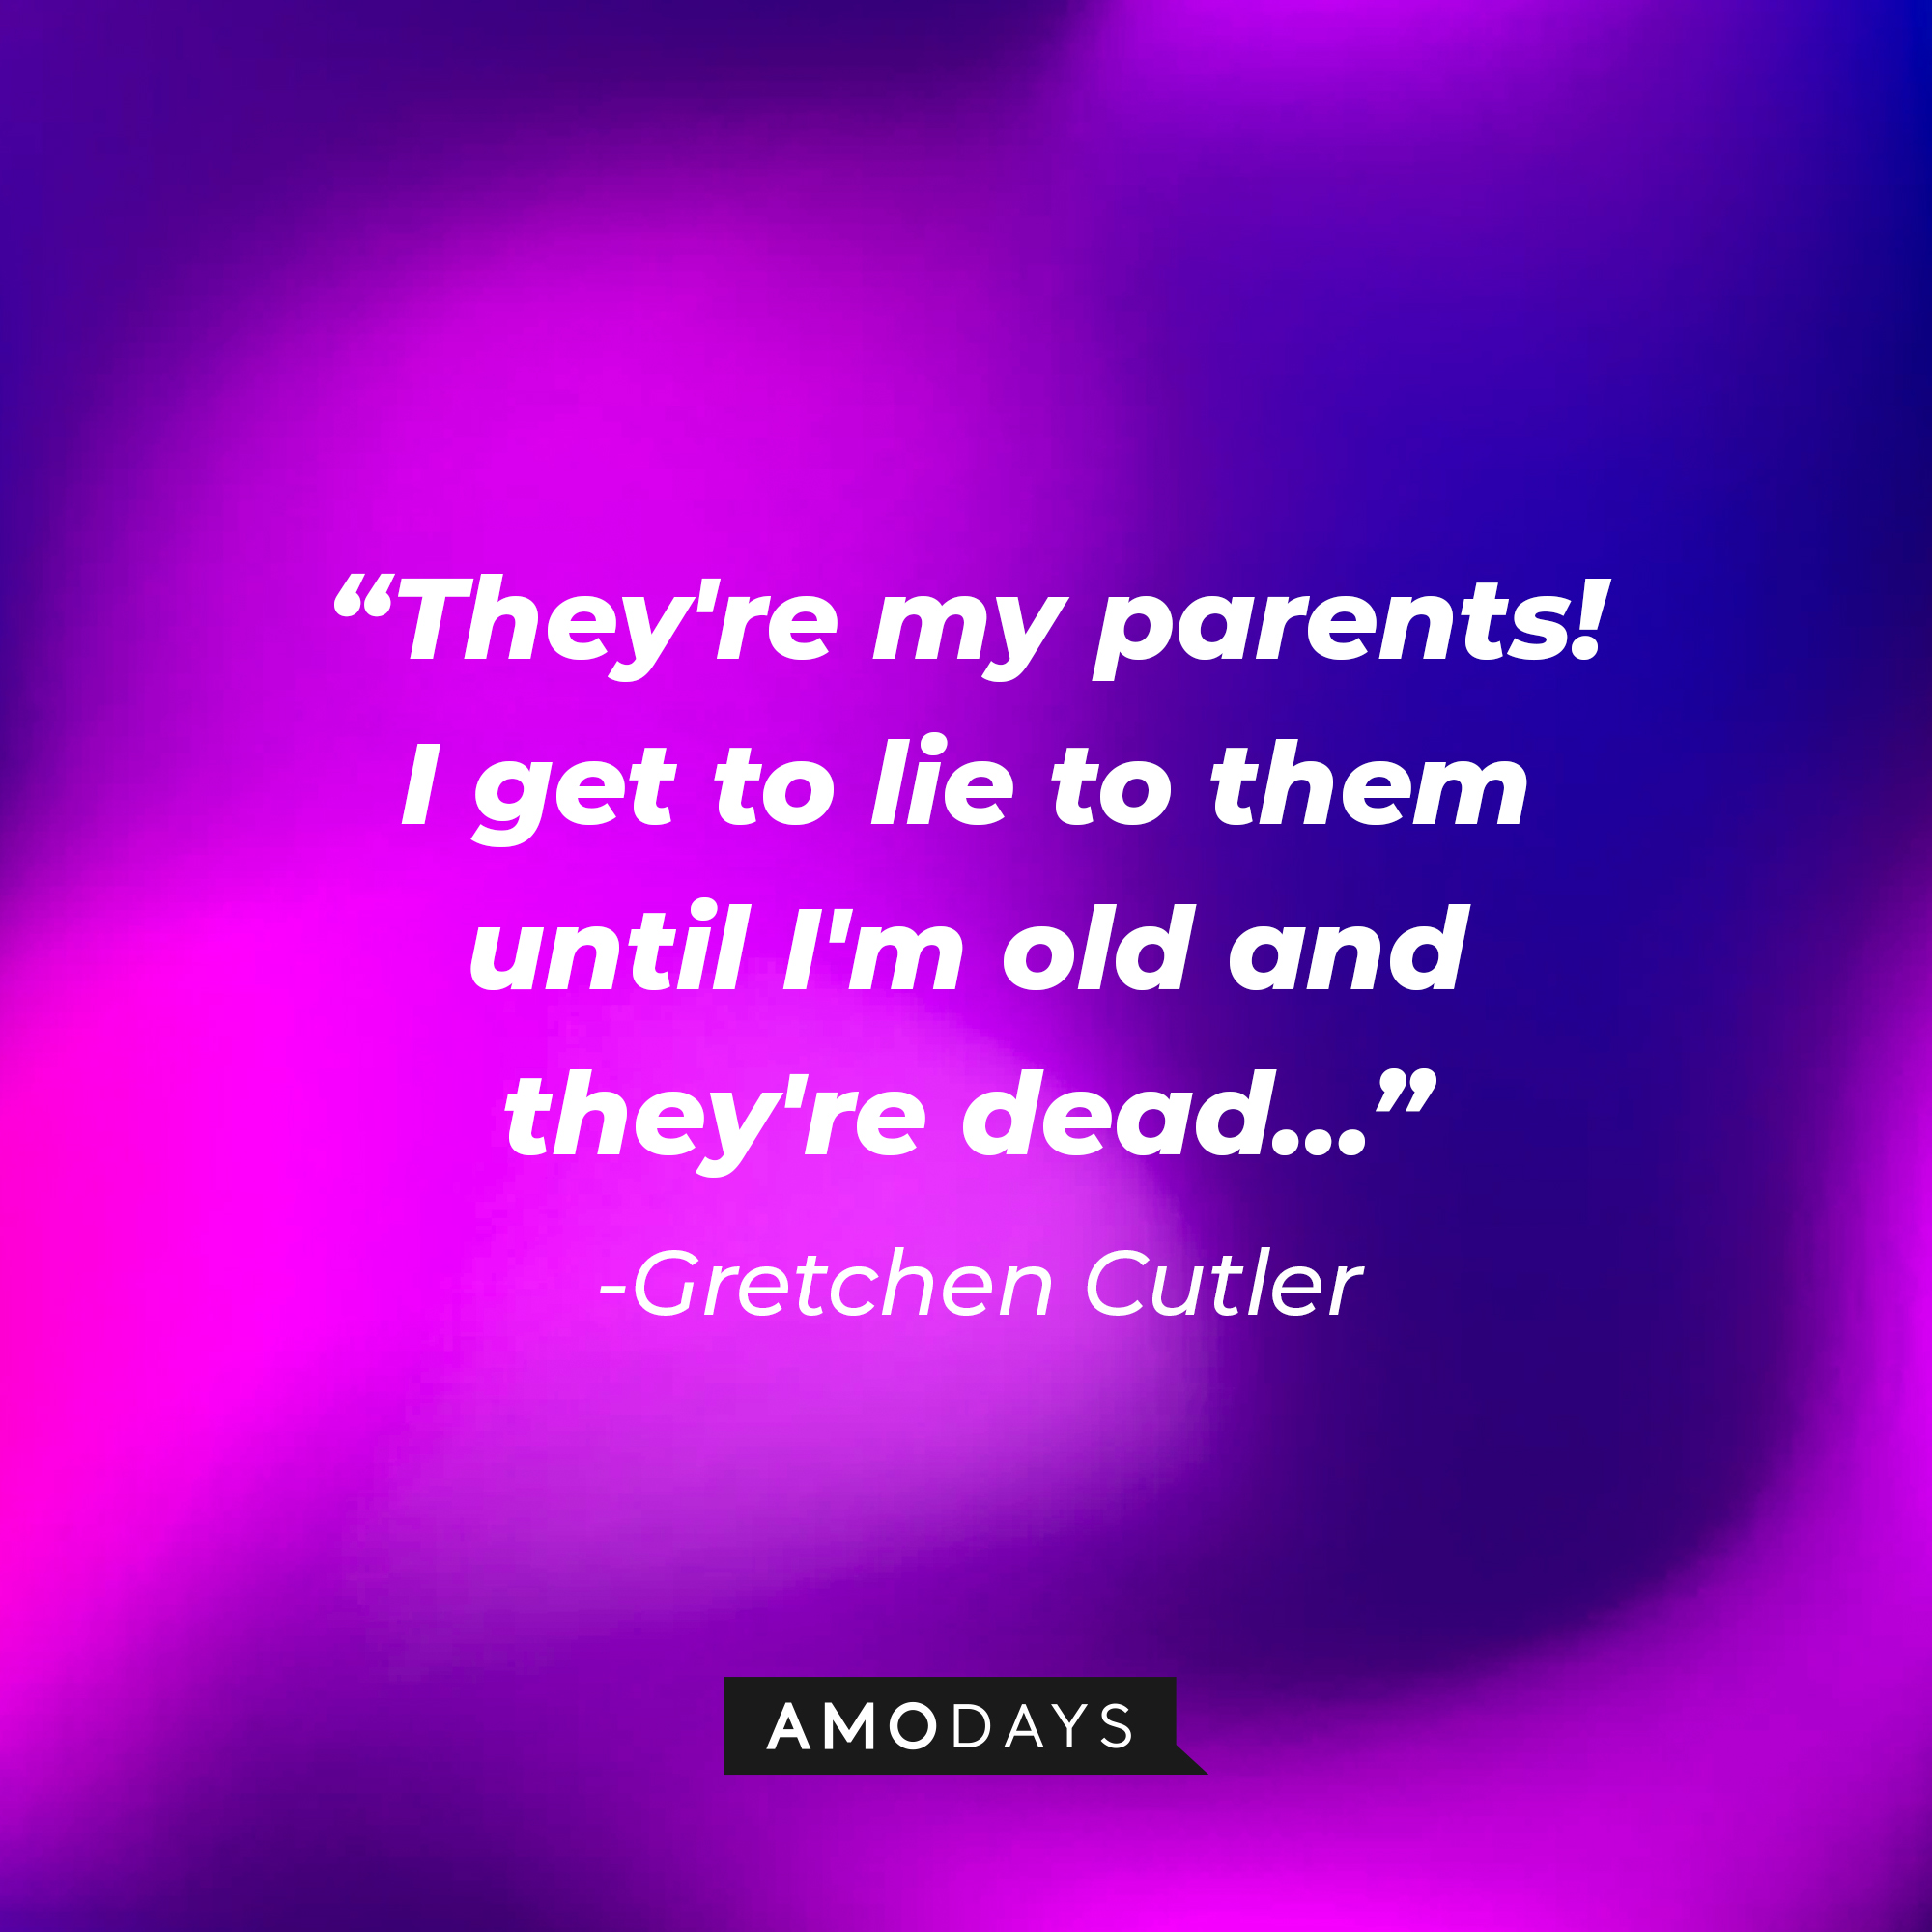 Gretchen Cutler’s quote: “They're my parents! I get to lie to them until I'm old and they're dead…” | Source: AmoDays